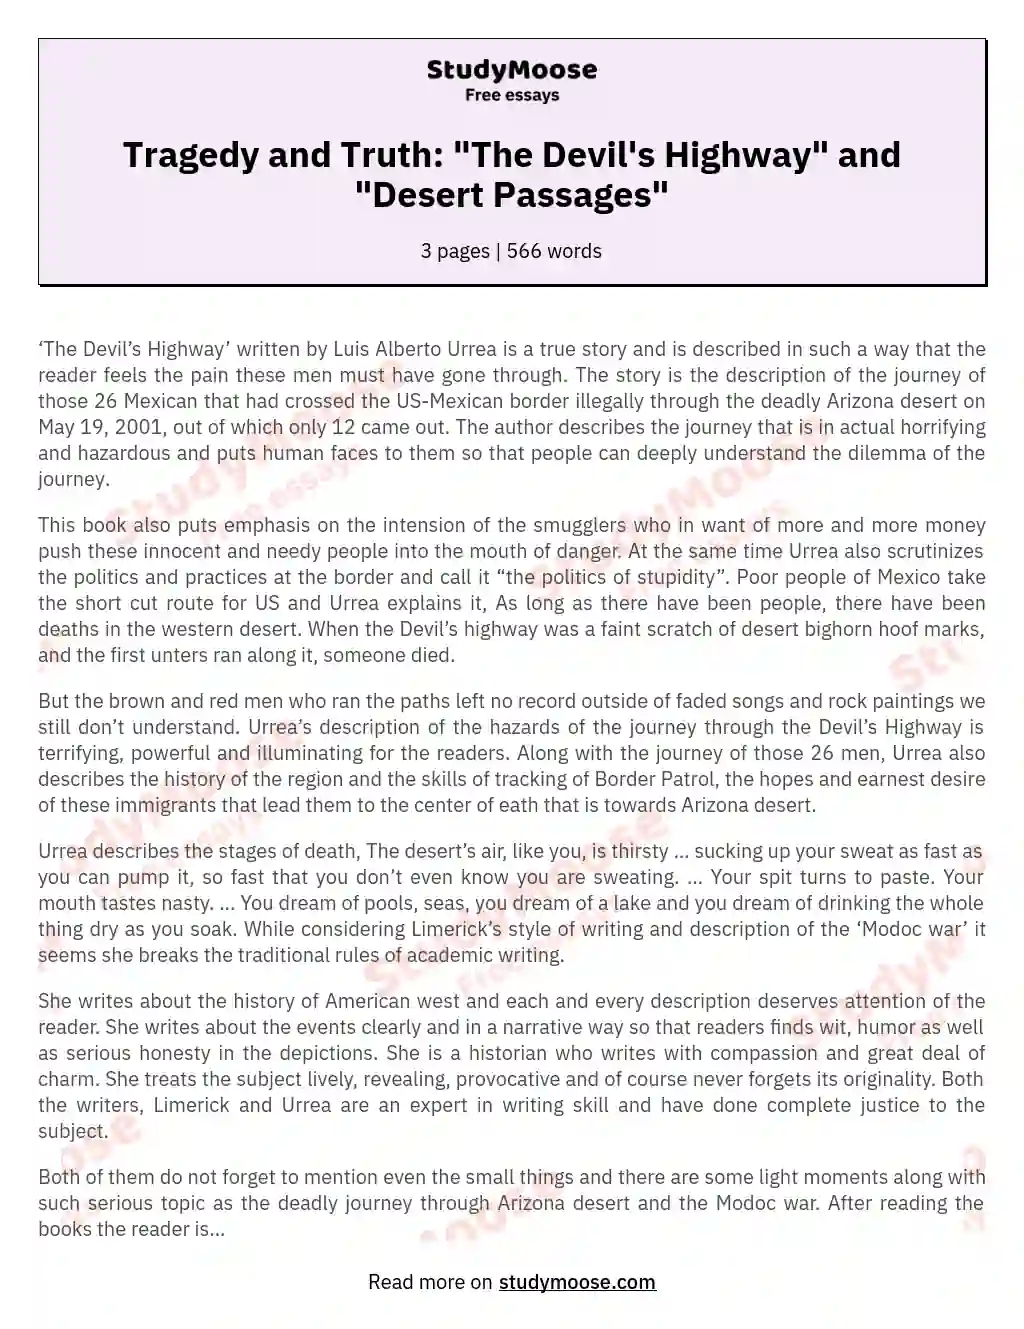 Tragedy and Truth: "The Devil's Highway" and "Desert Passages" essay